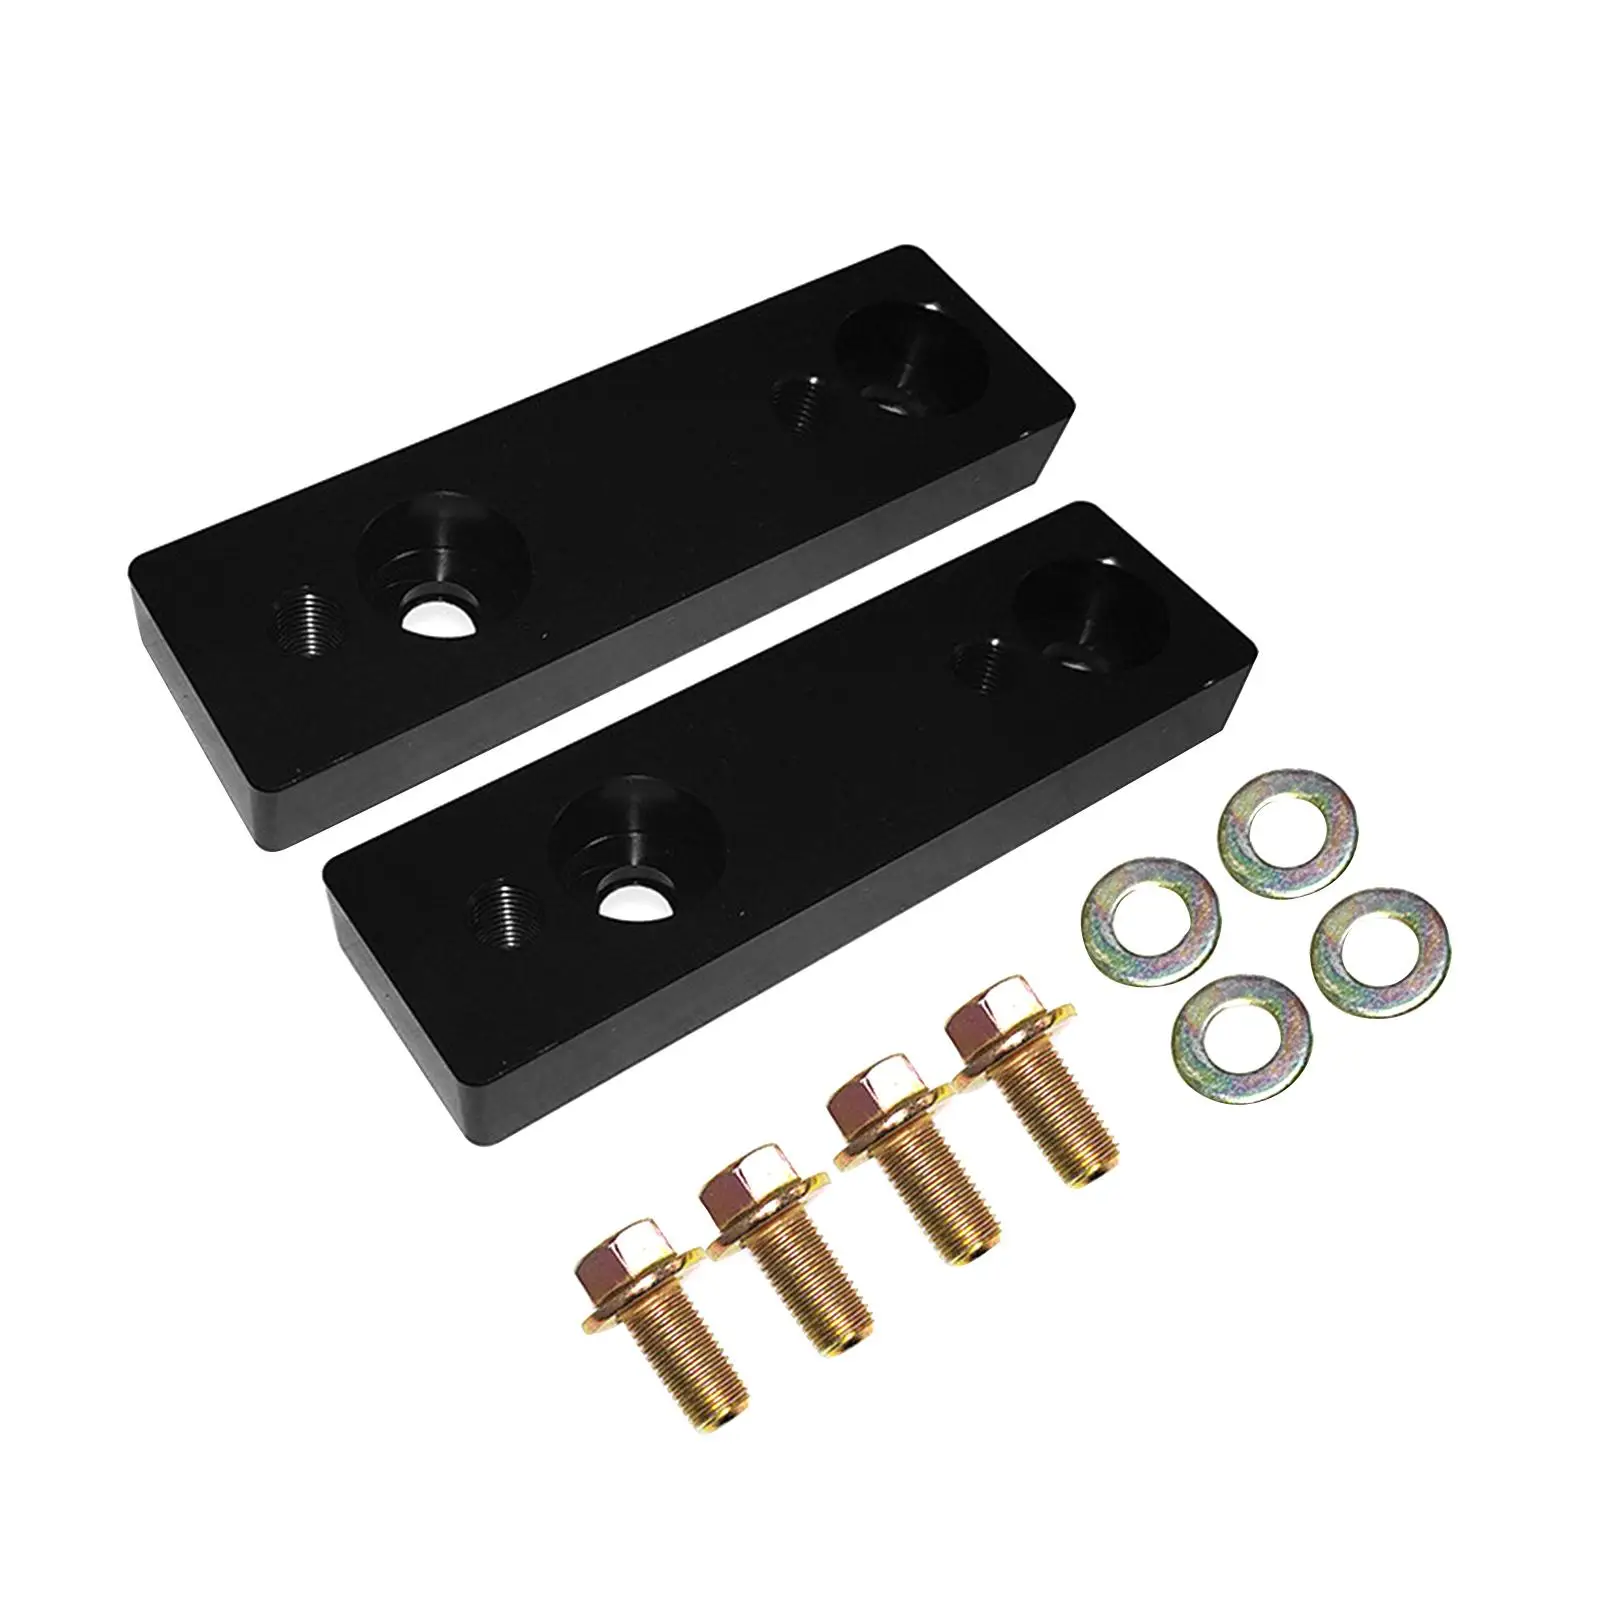 Sway Bar Drop Bracket Set Car Accessory Replacement Easy Installation Sway Control Bracket Car Swaybar for Tacoma 2WD 4WD